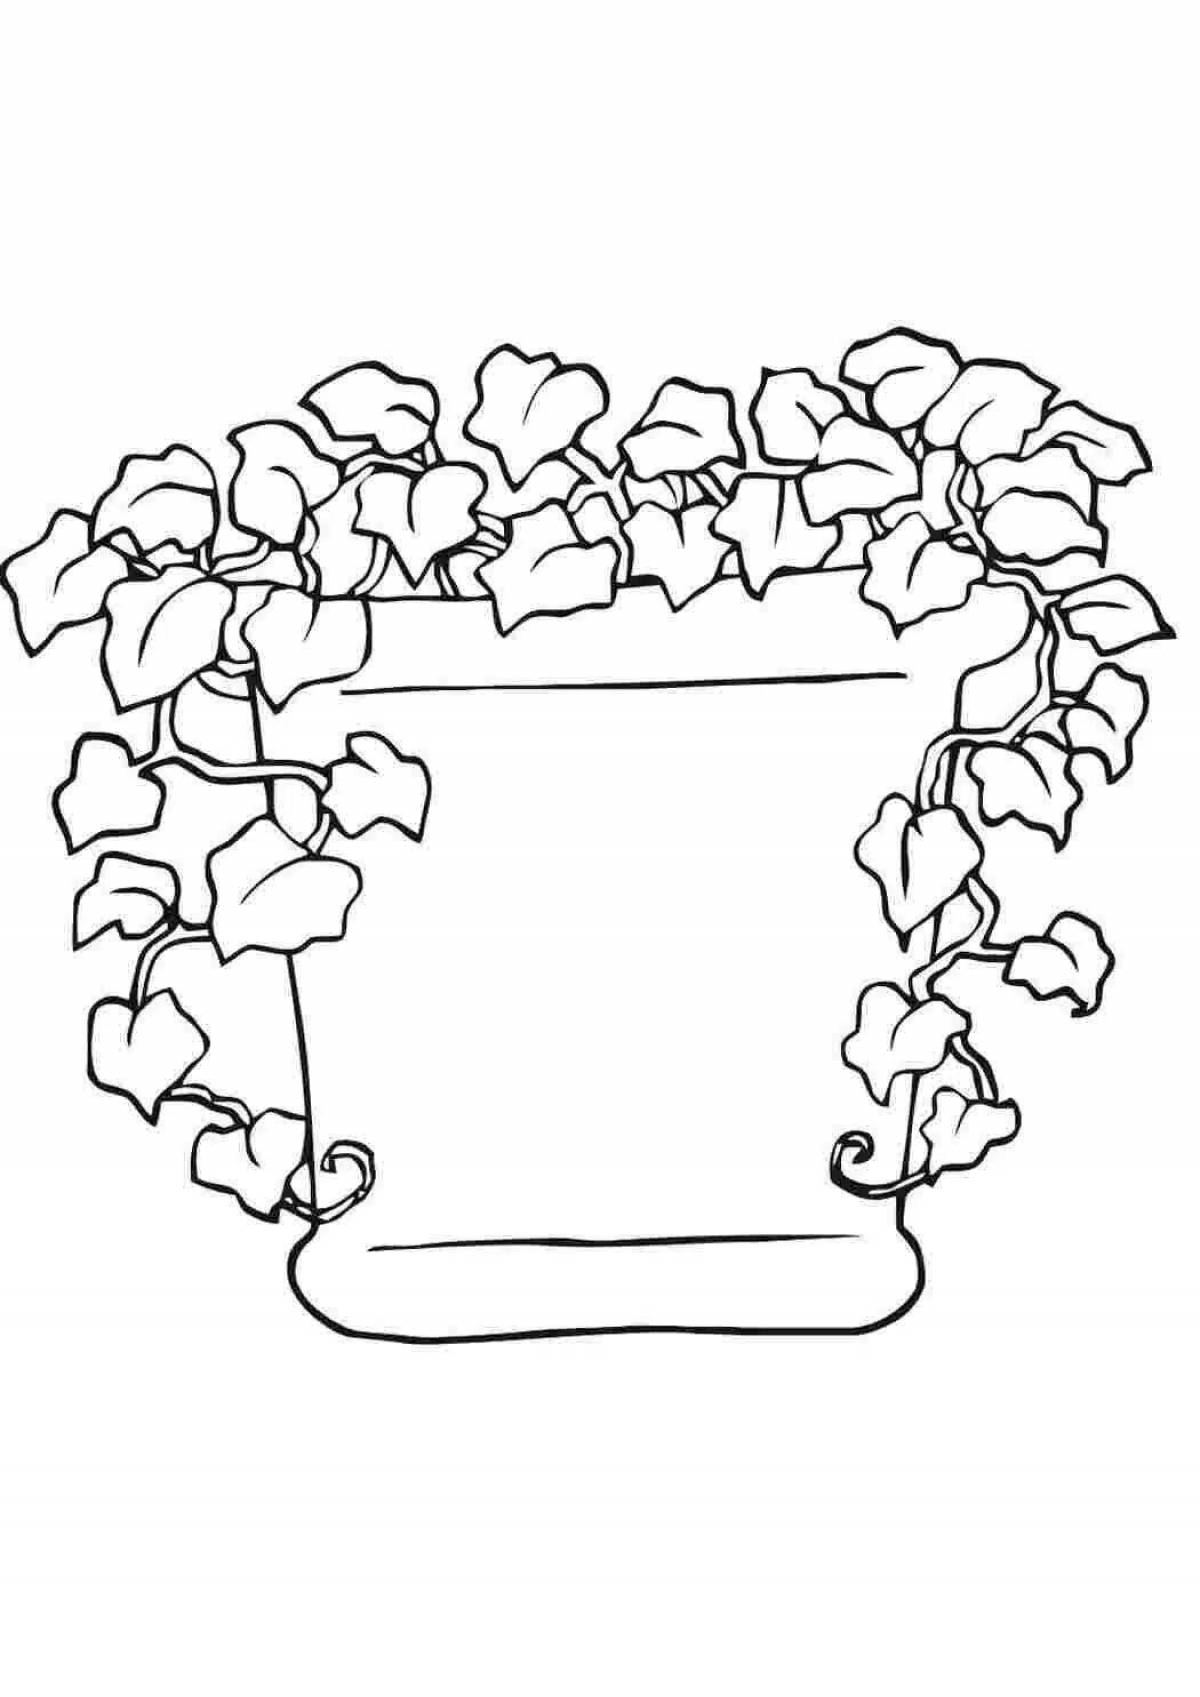 Coloring book shining potted flowers for teenagers